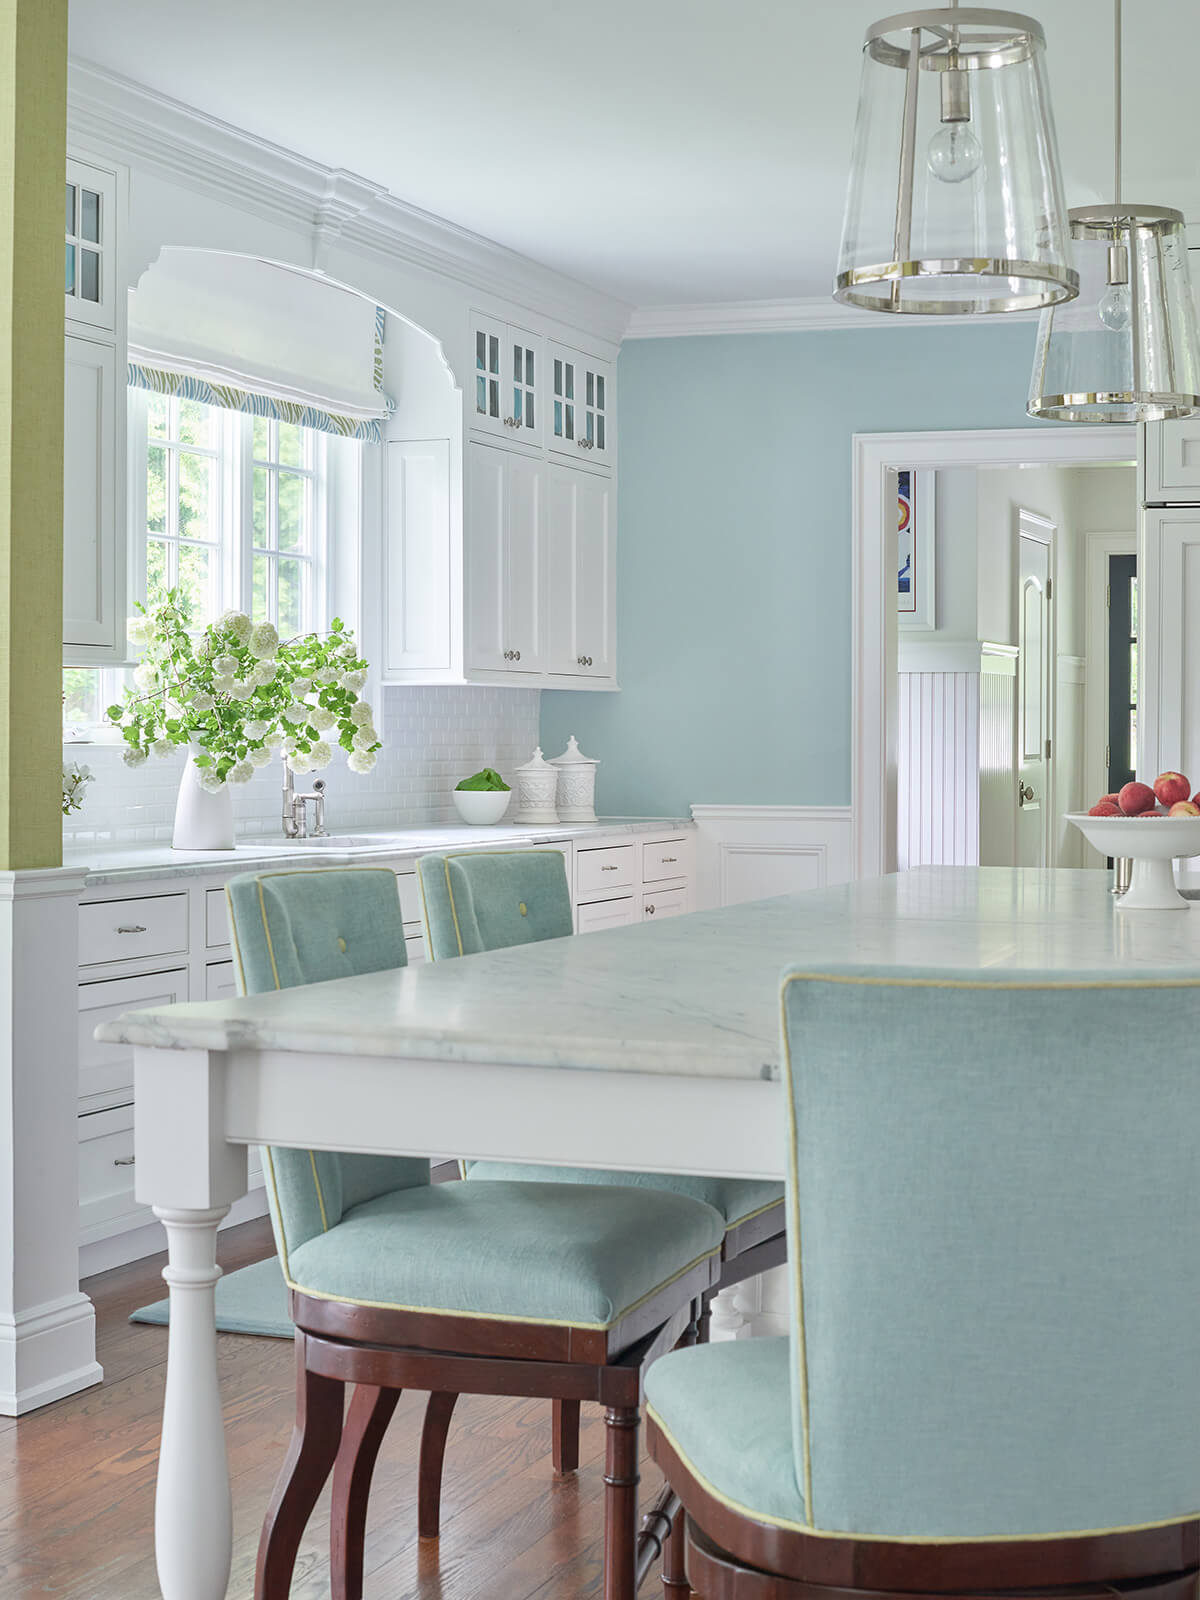 Courtney Hanig Interiors provides first-class professional service and the utmost in style.